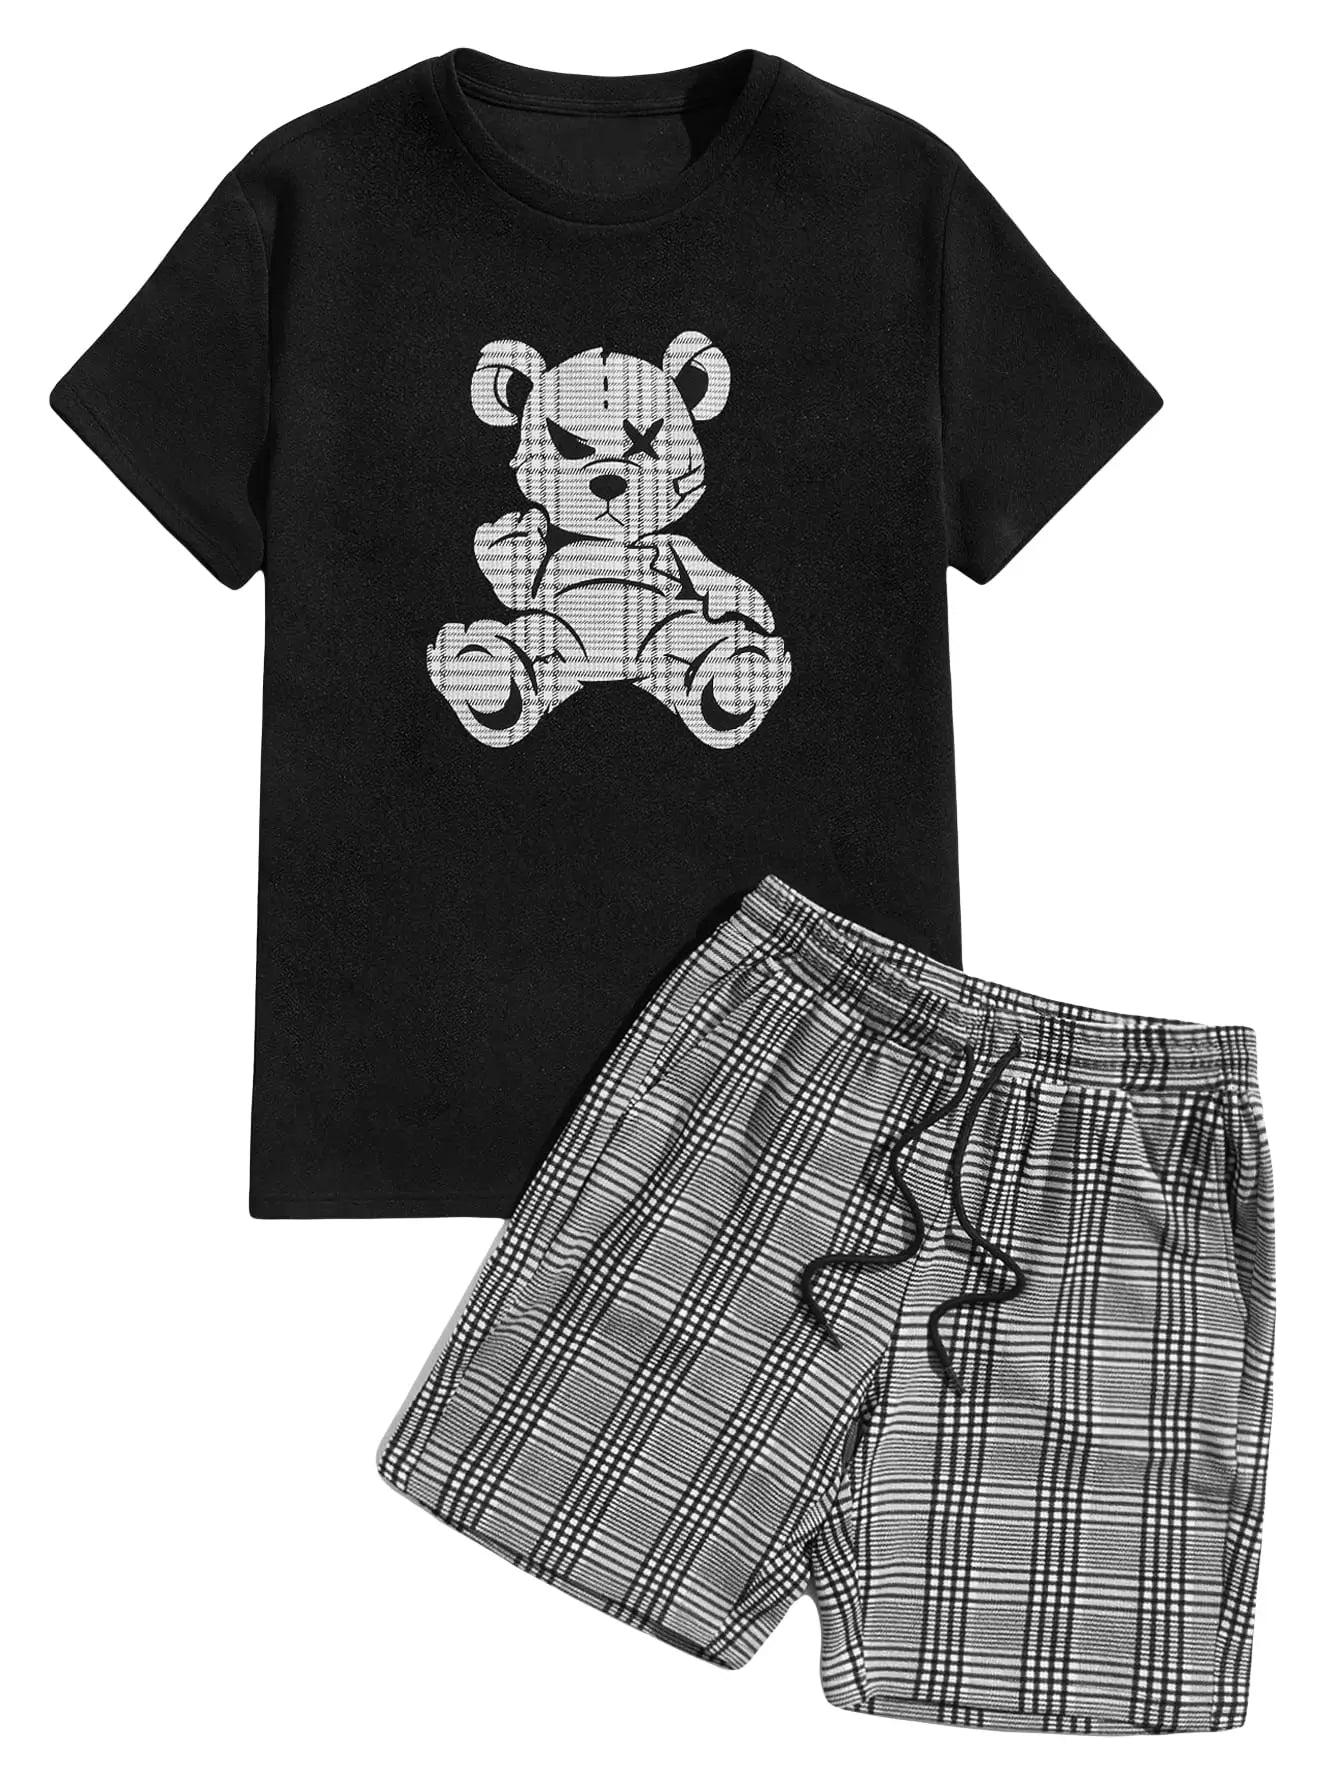 Elevate Your Summer Style: Luxury Men's Sportswear 2-piece Retro Set. This Fashion Clothing Set Features Street Wear Bear Pattern with 3D Printing Style on T-shirt and Shorts